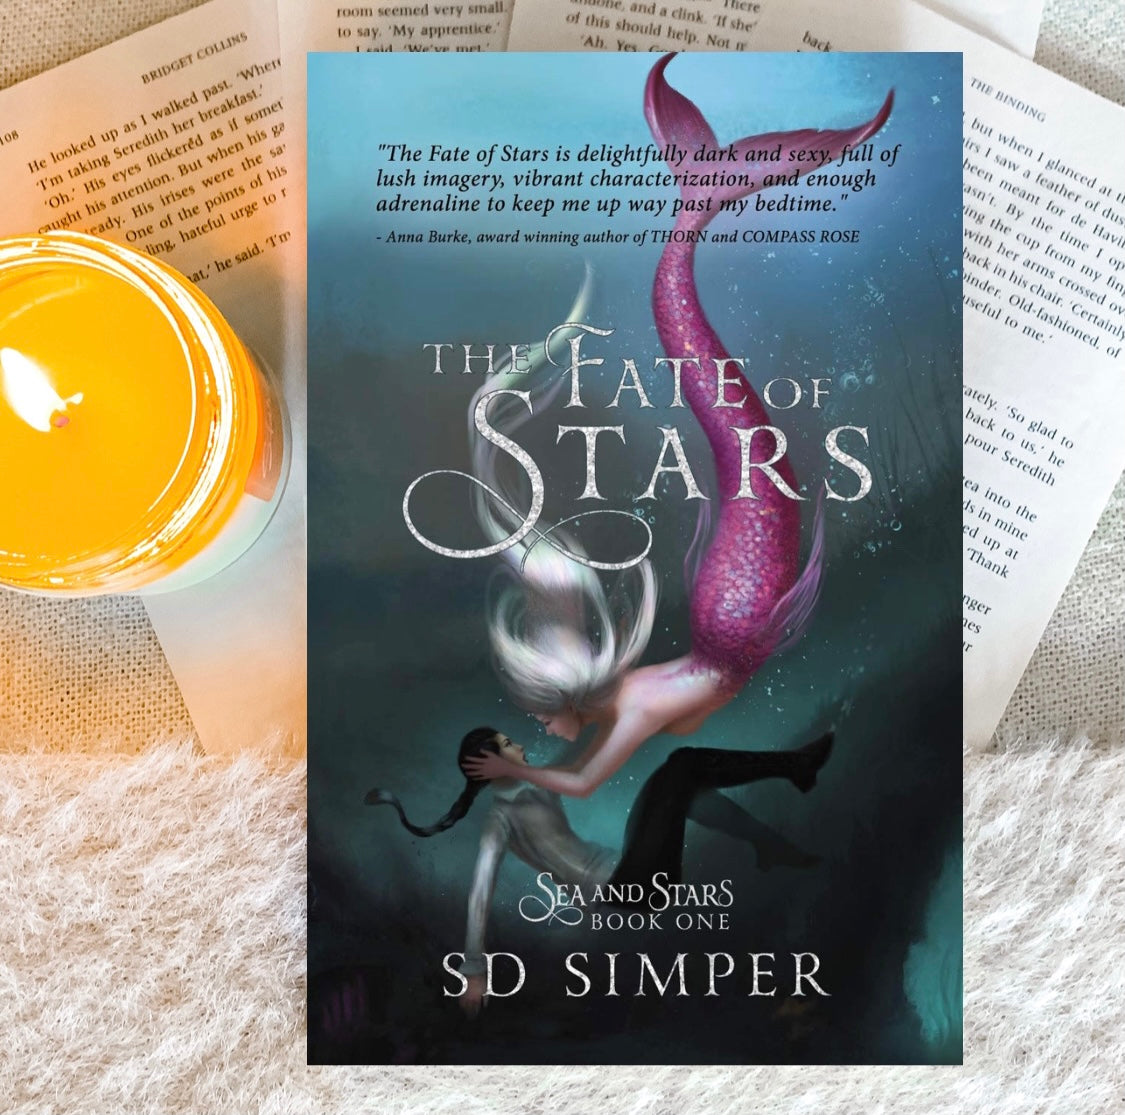 Sea and Stars series by SD Simper